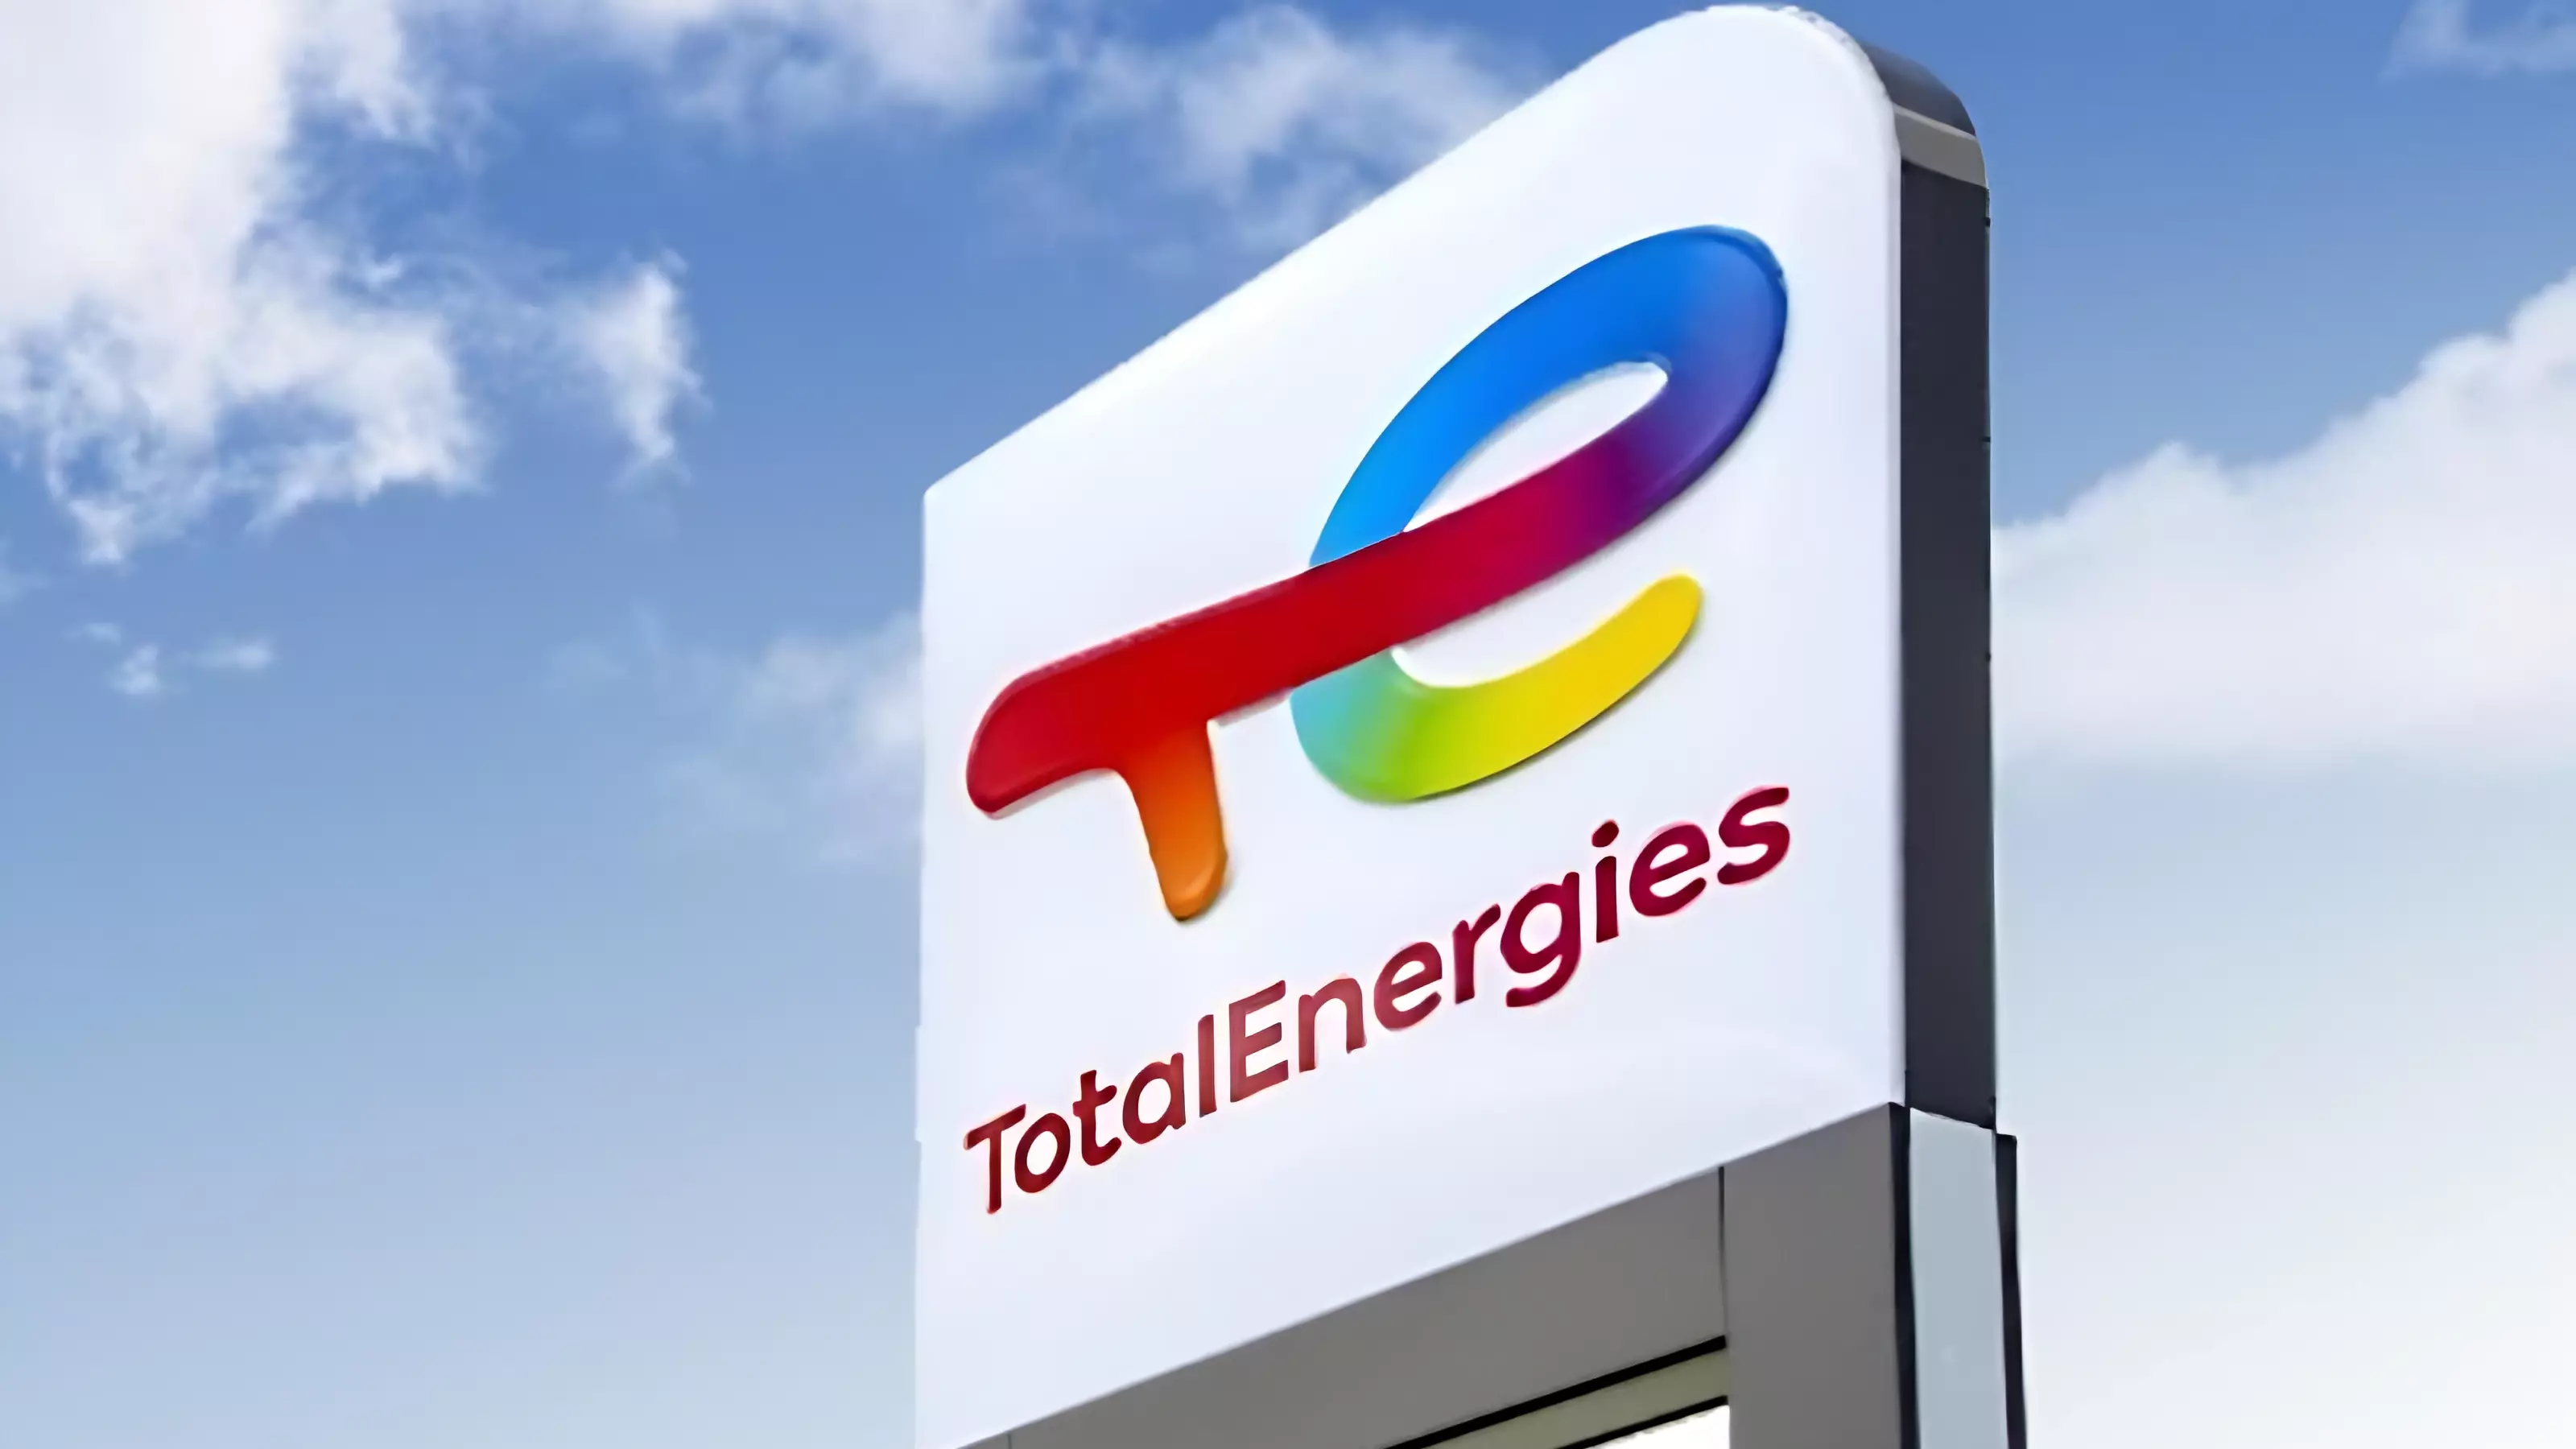 totalenergies-prodolzit-listing-vo-francii-rss-1715842802-98ee91fb6a6c0125f97c70d2161ced7a